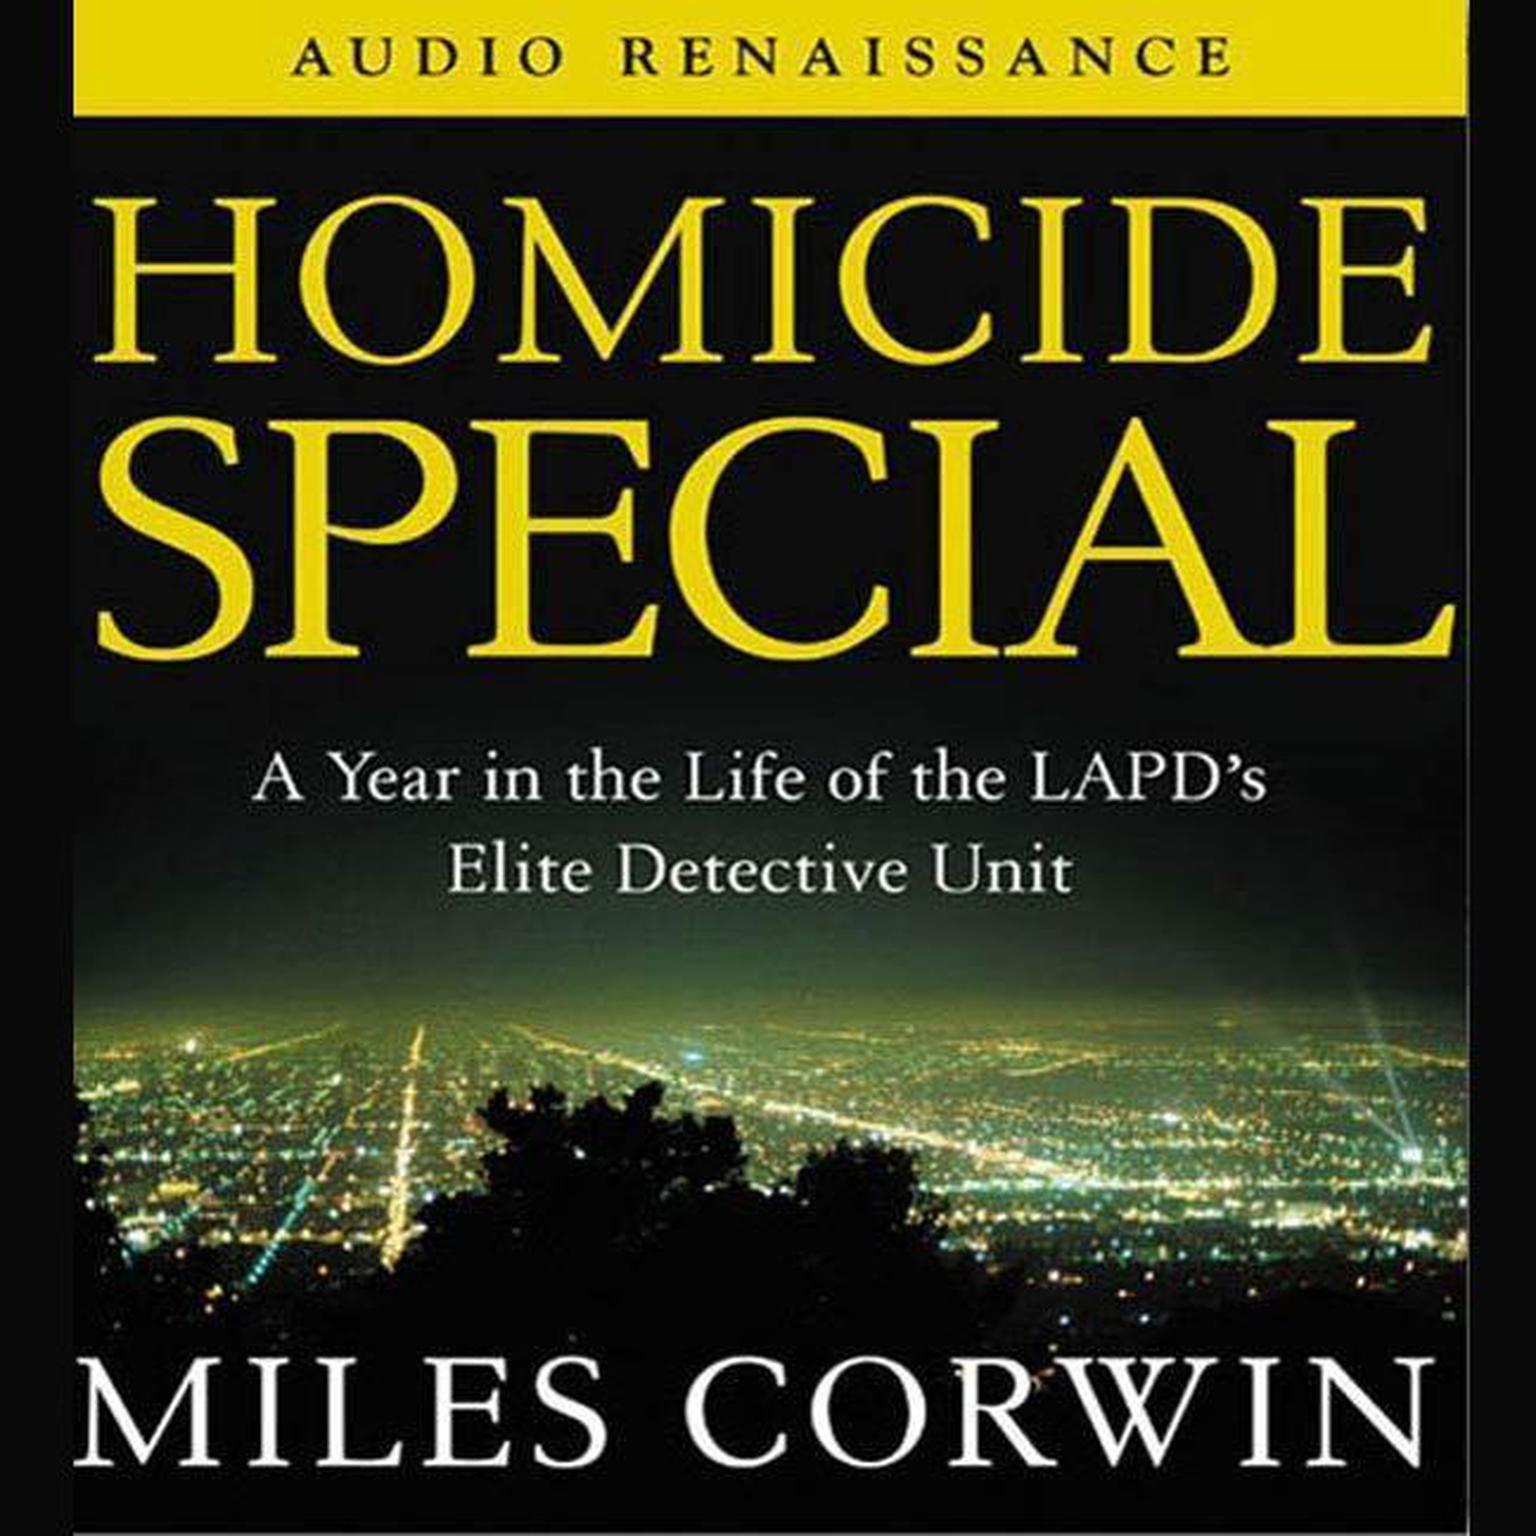 Homicide Special (Abridged): A Year in the Life of the LAPDs Elite Detective Unit Audiobook, by Miles Corwin